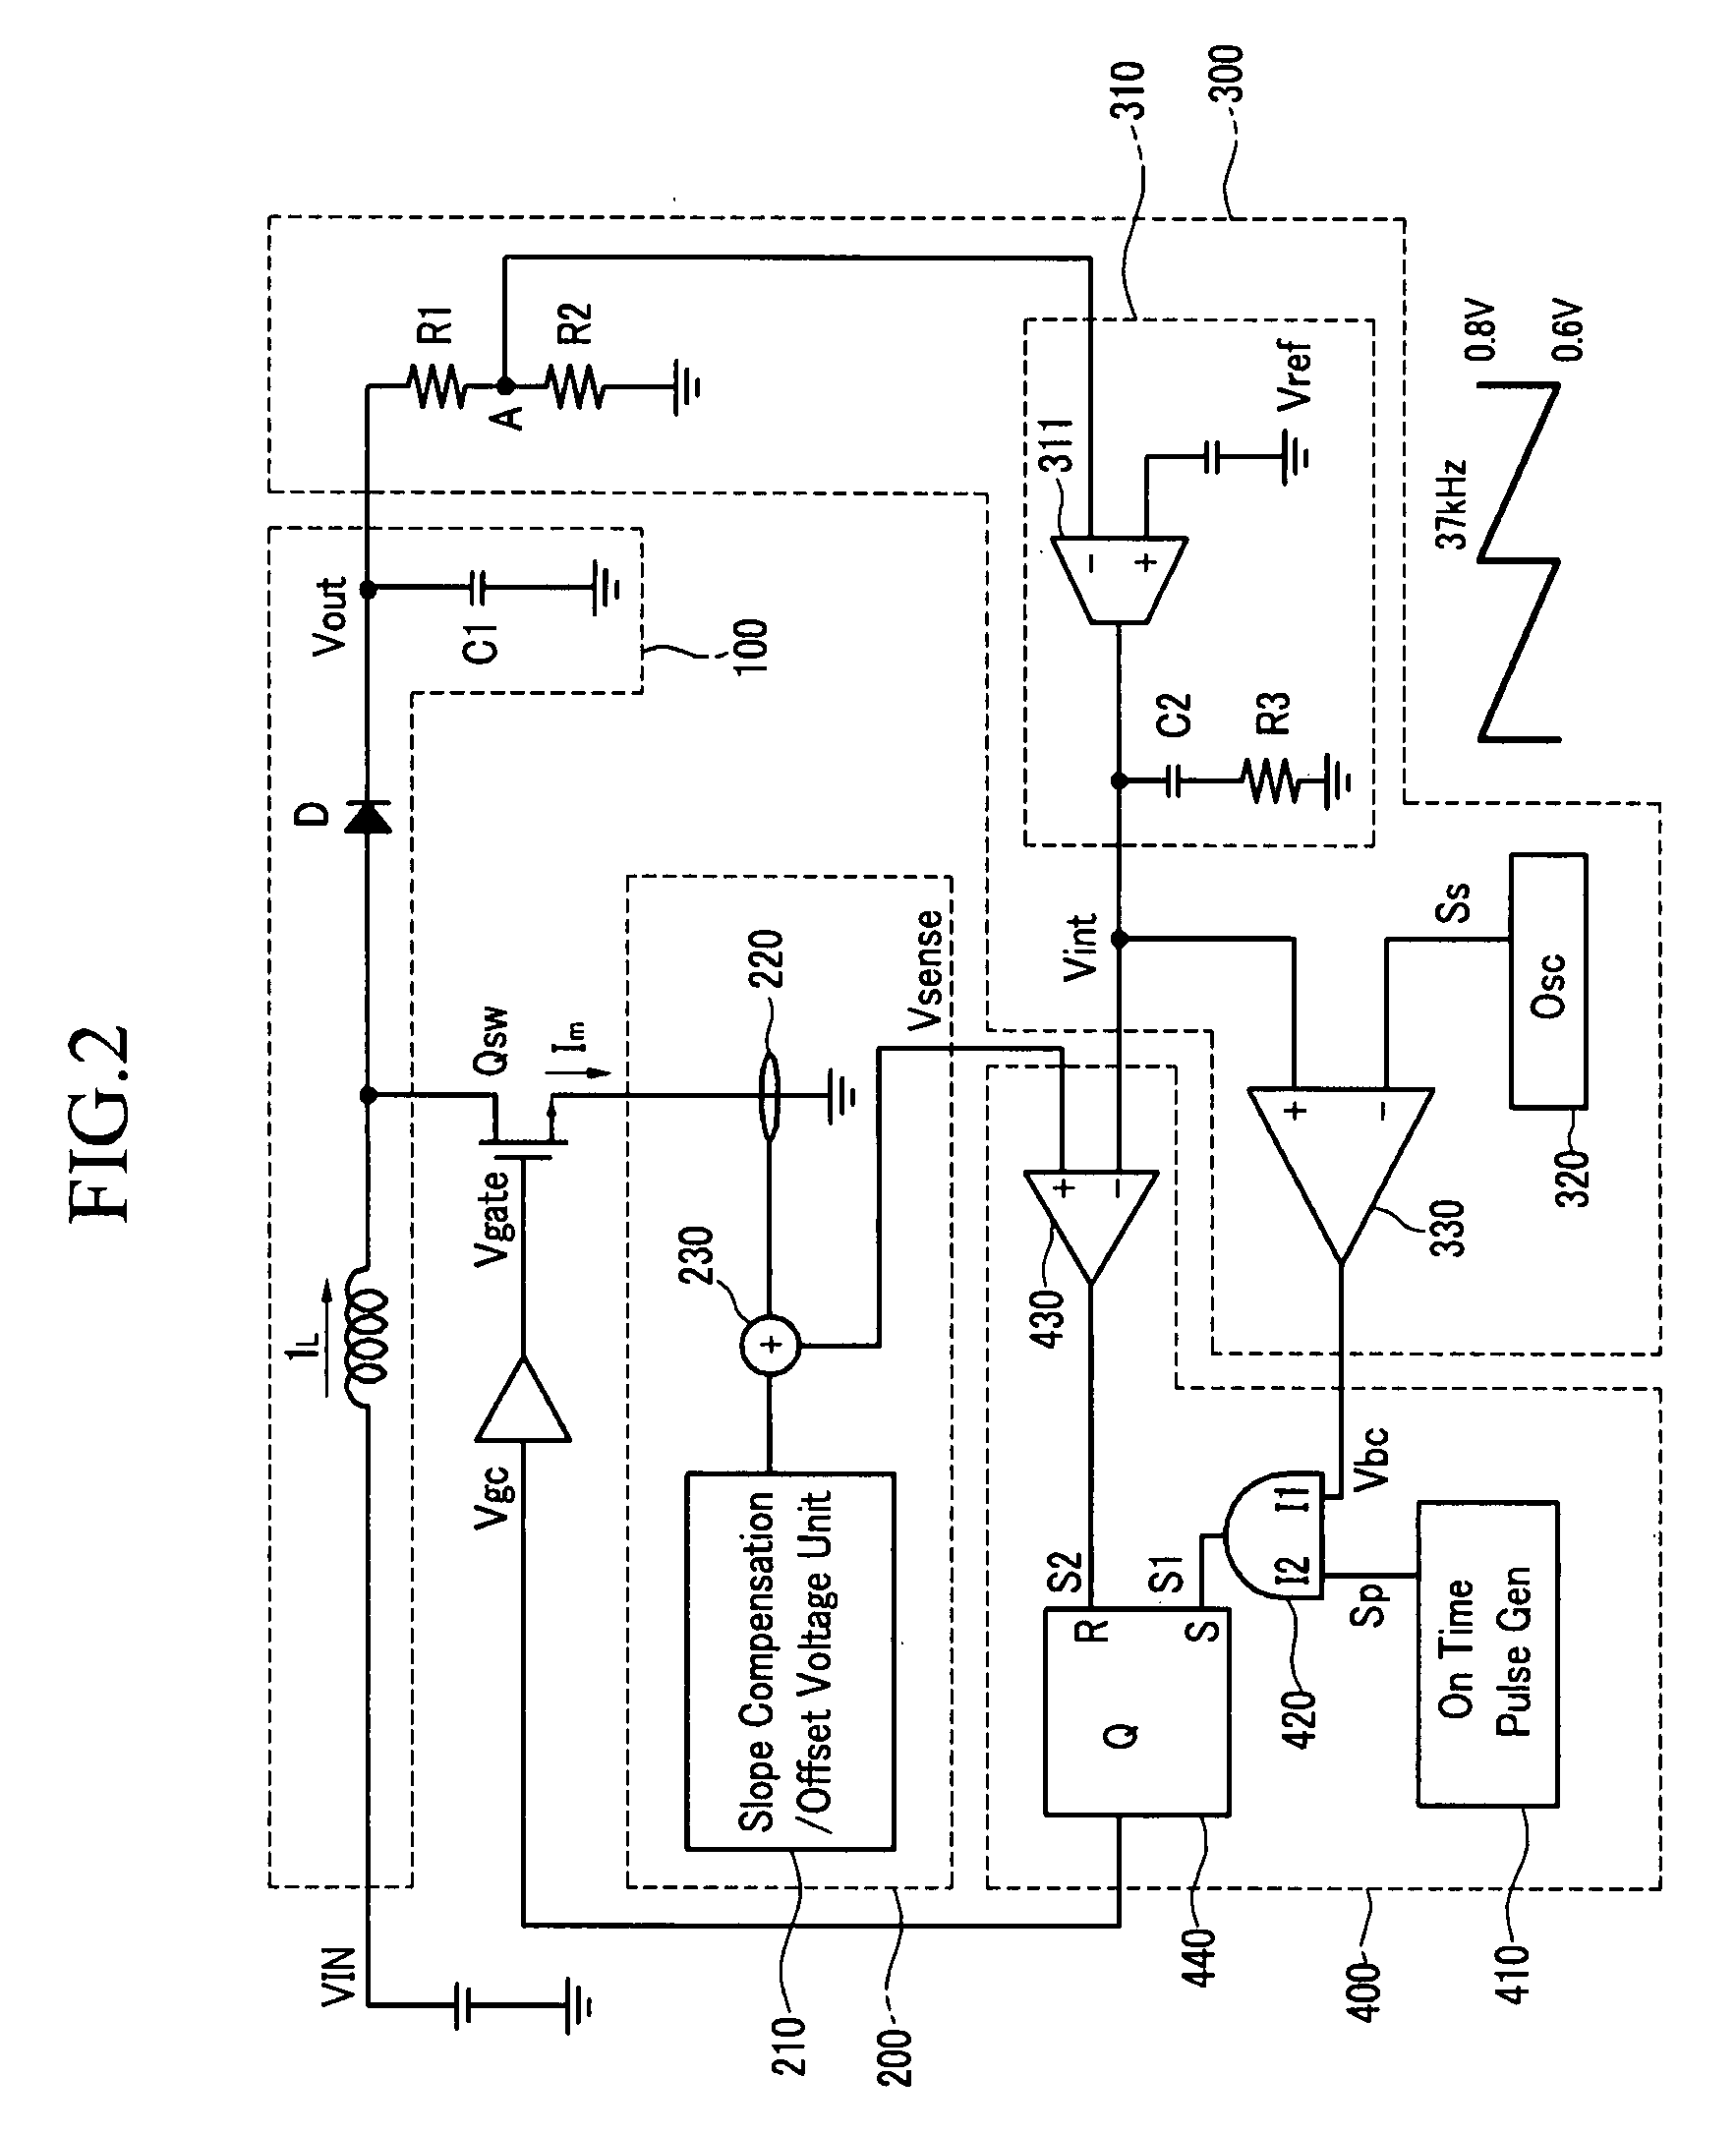 Burst mode operation in a DC-DC converter